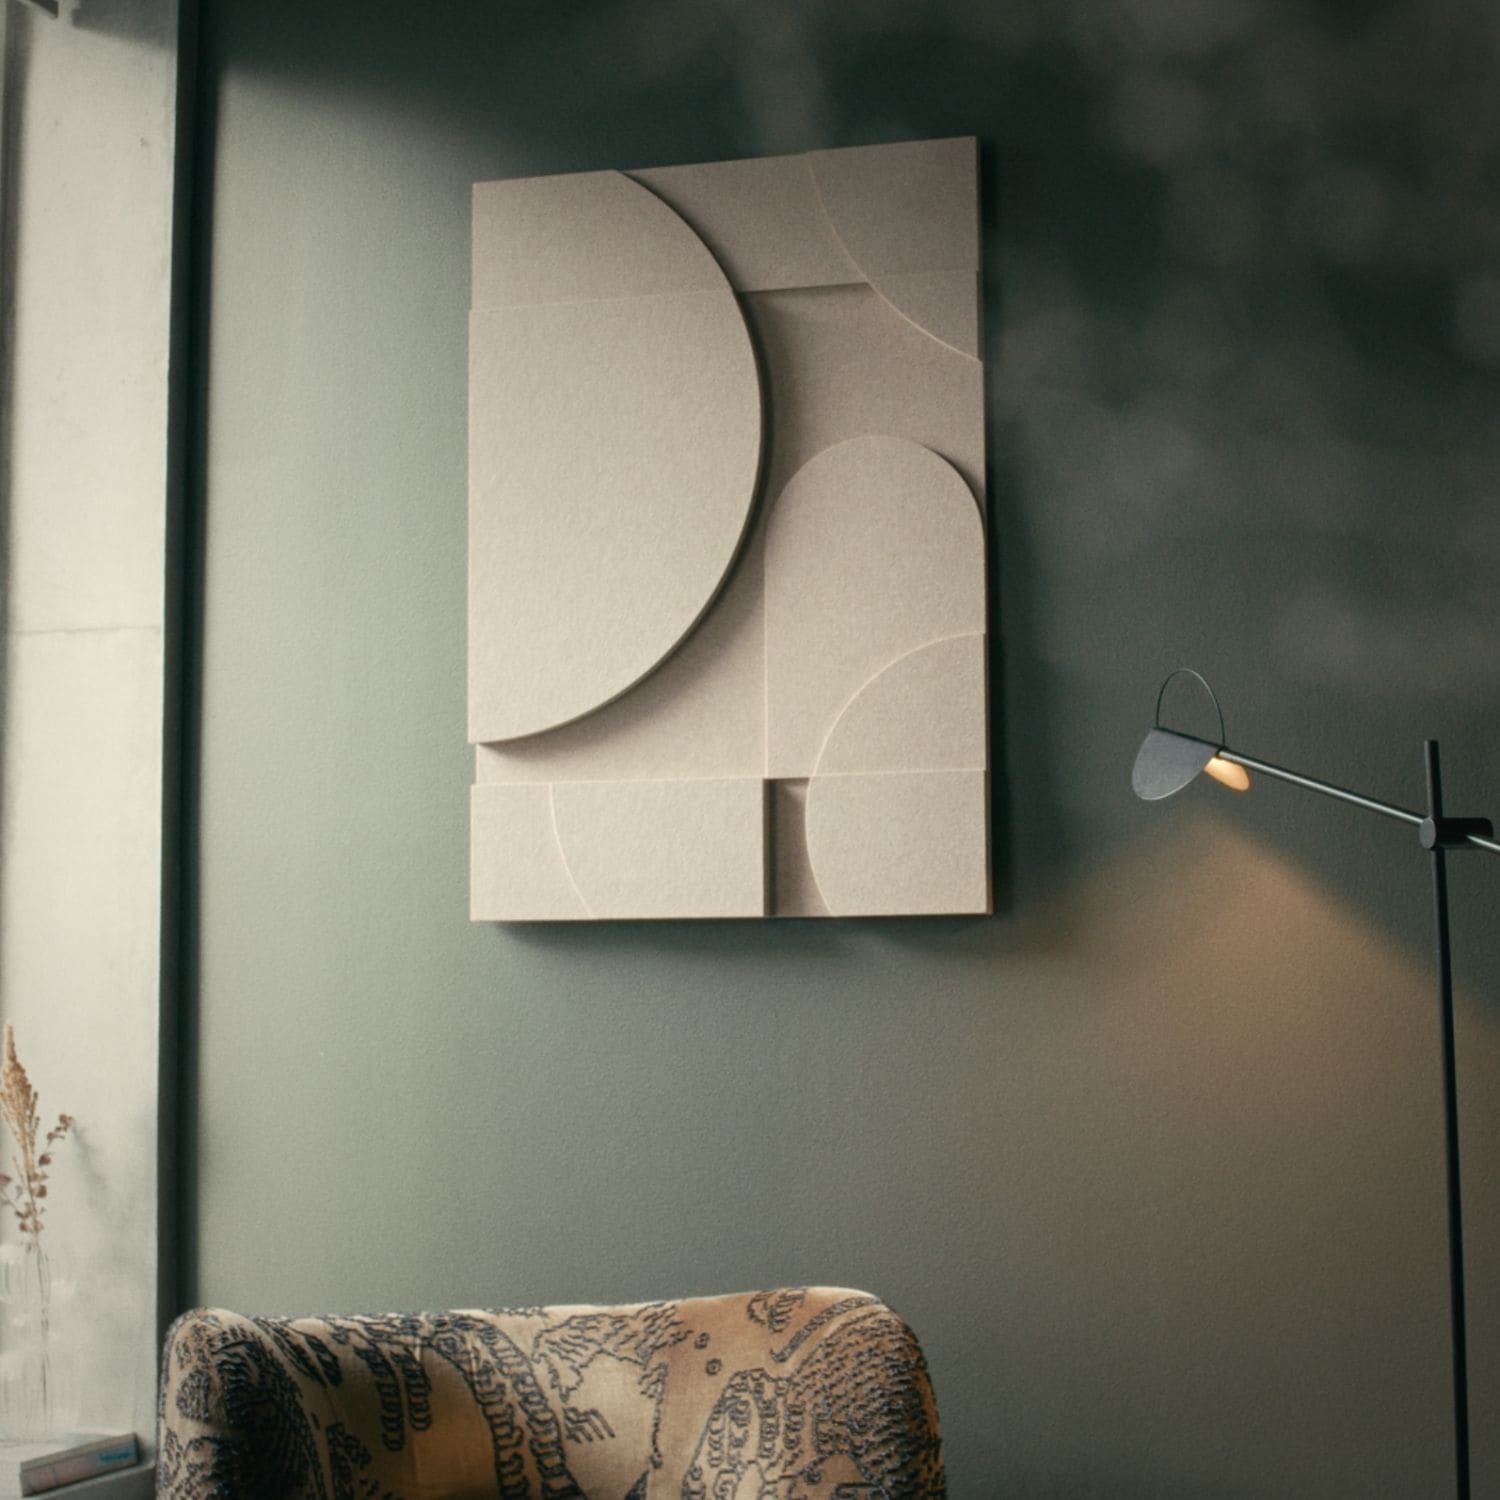 Geometric Acoustic Panel from Arturel, Hung in a Stylish Living Room for Optimal Sound Absorption